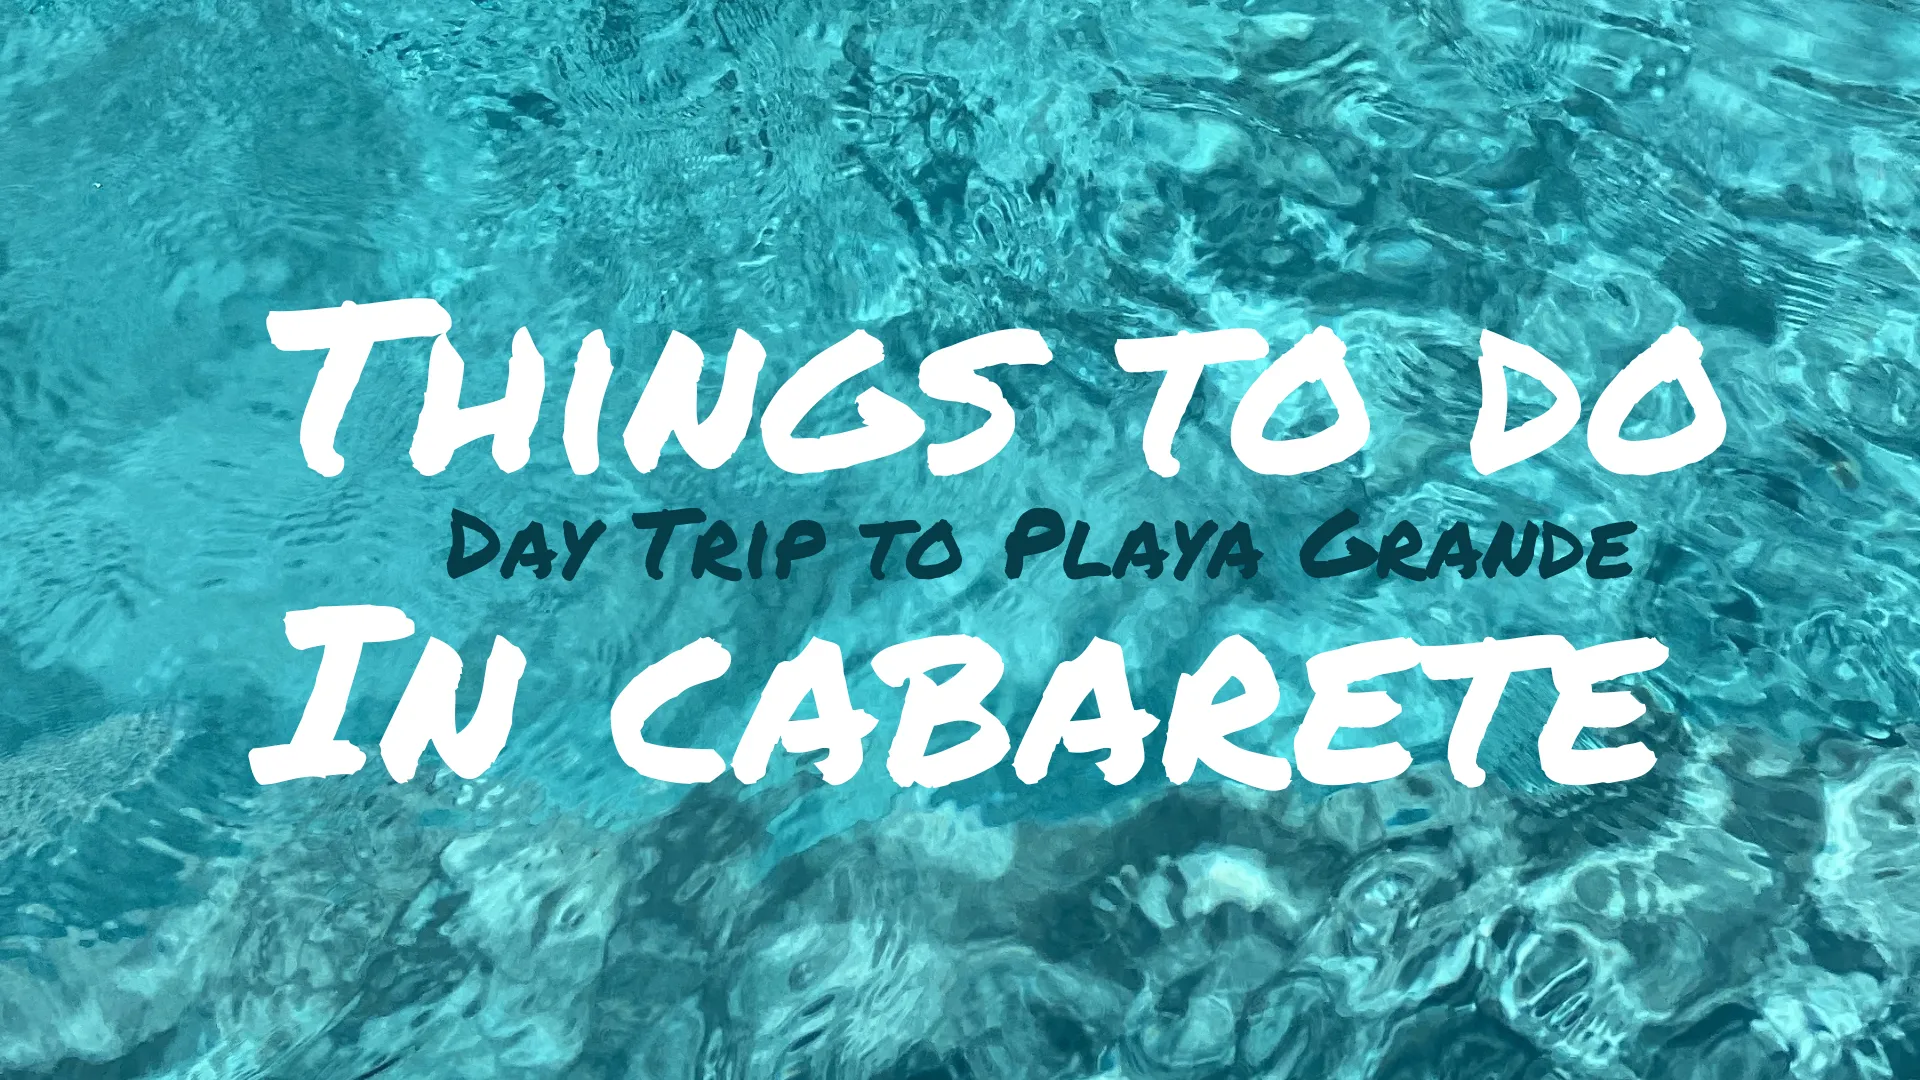 Things To Do in Cabarete: Day Trip to Playa Grande